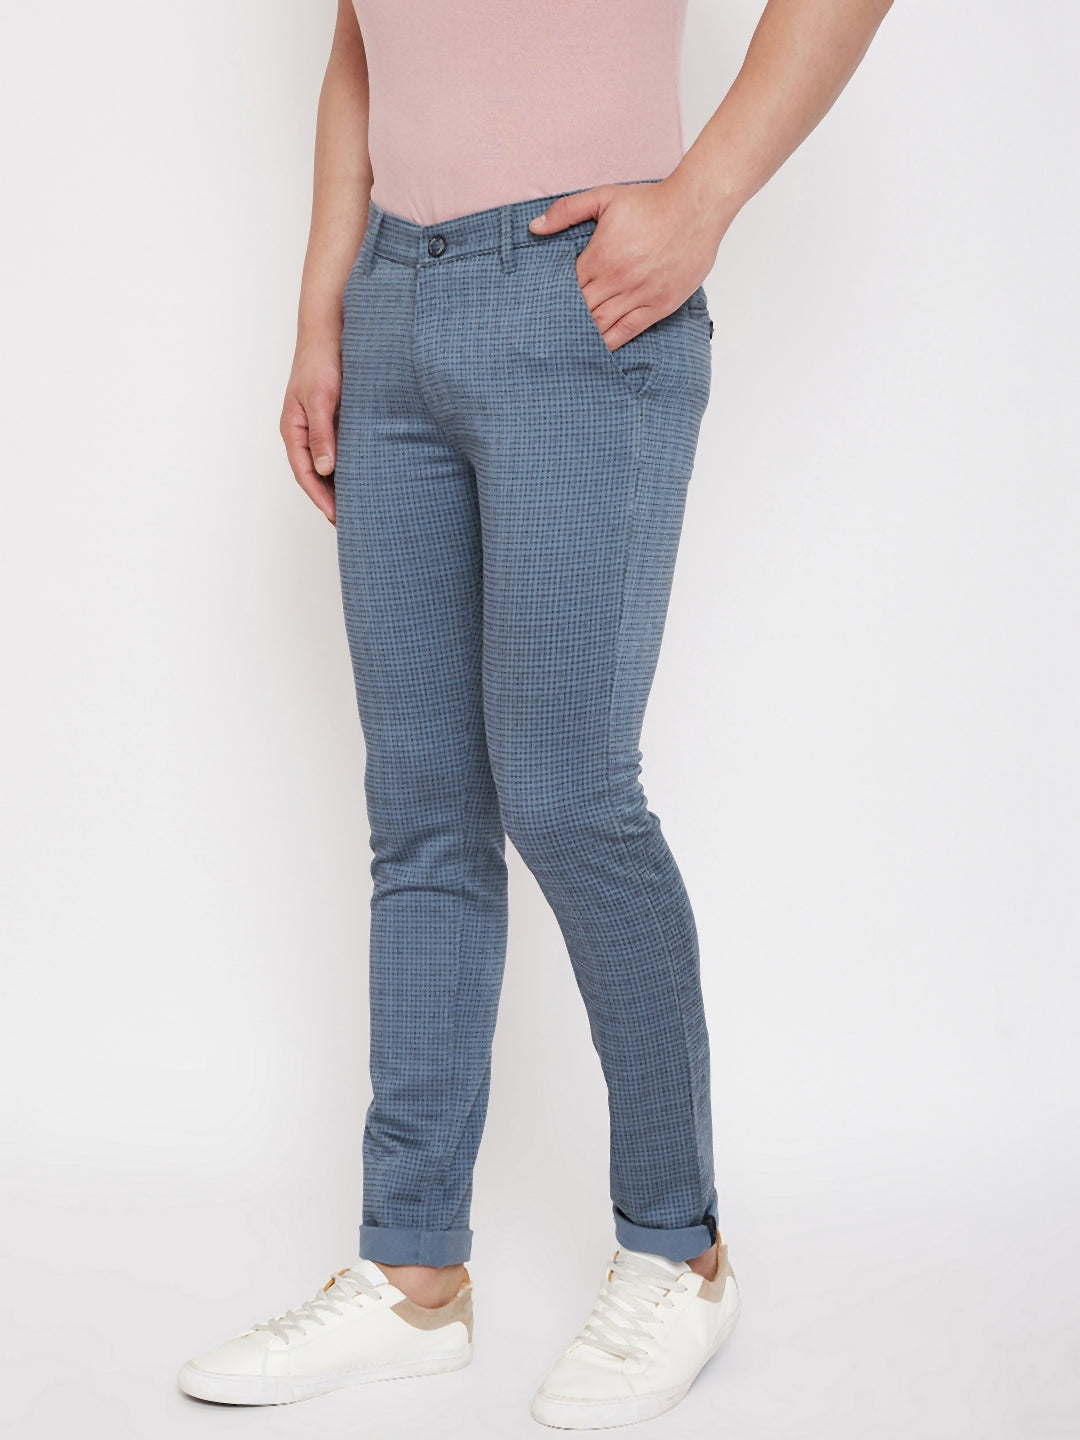 Blue Slim Fit Checked Trousers - Men Trousers